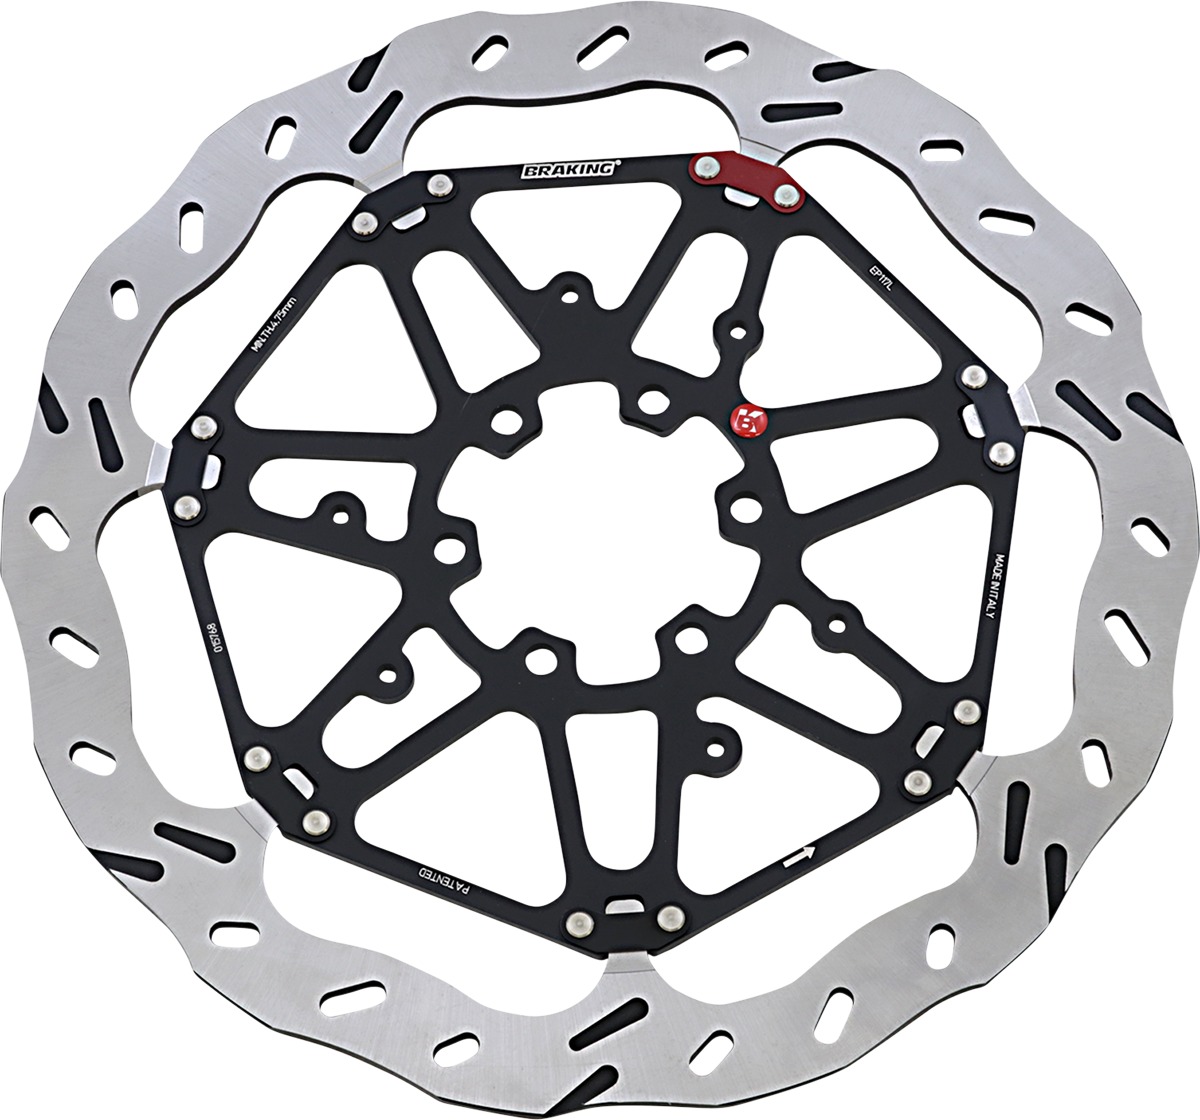 EPTA 320mm Floating Front Brake Rotors Set - For 14-18 S1000RR/R & 15-21 MG Tour - Click Image to Close